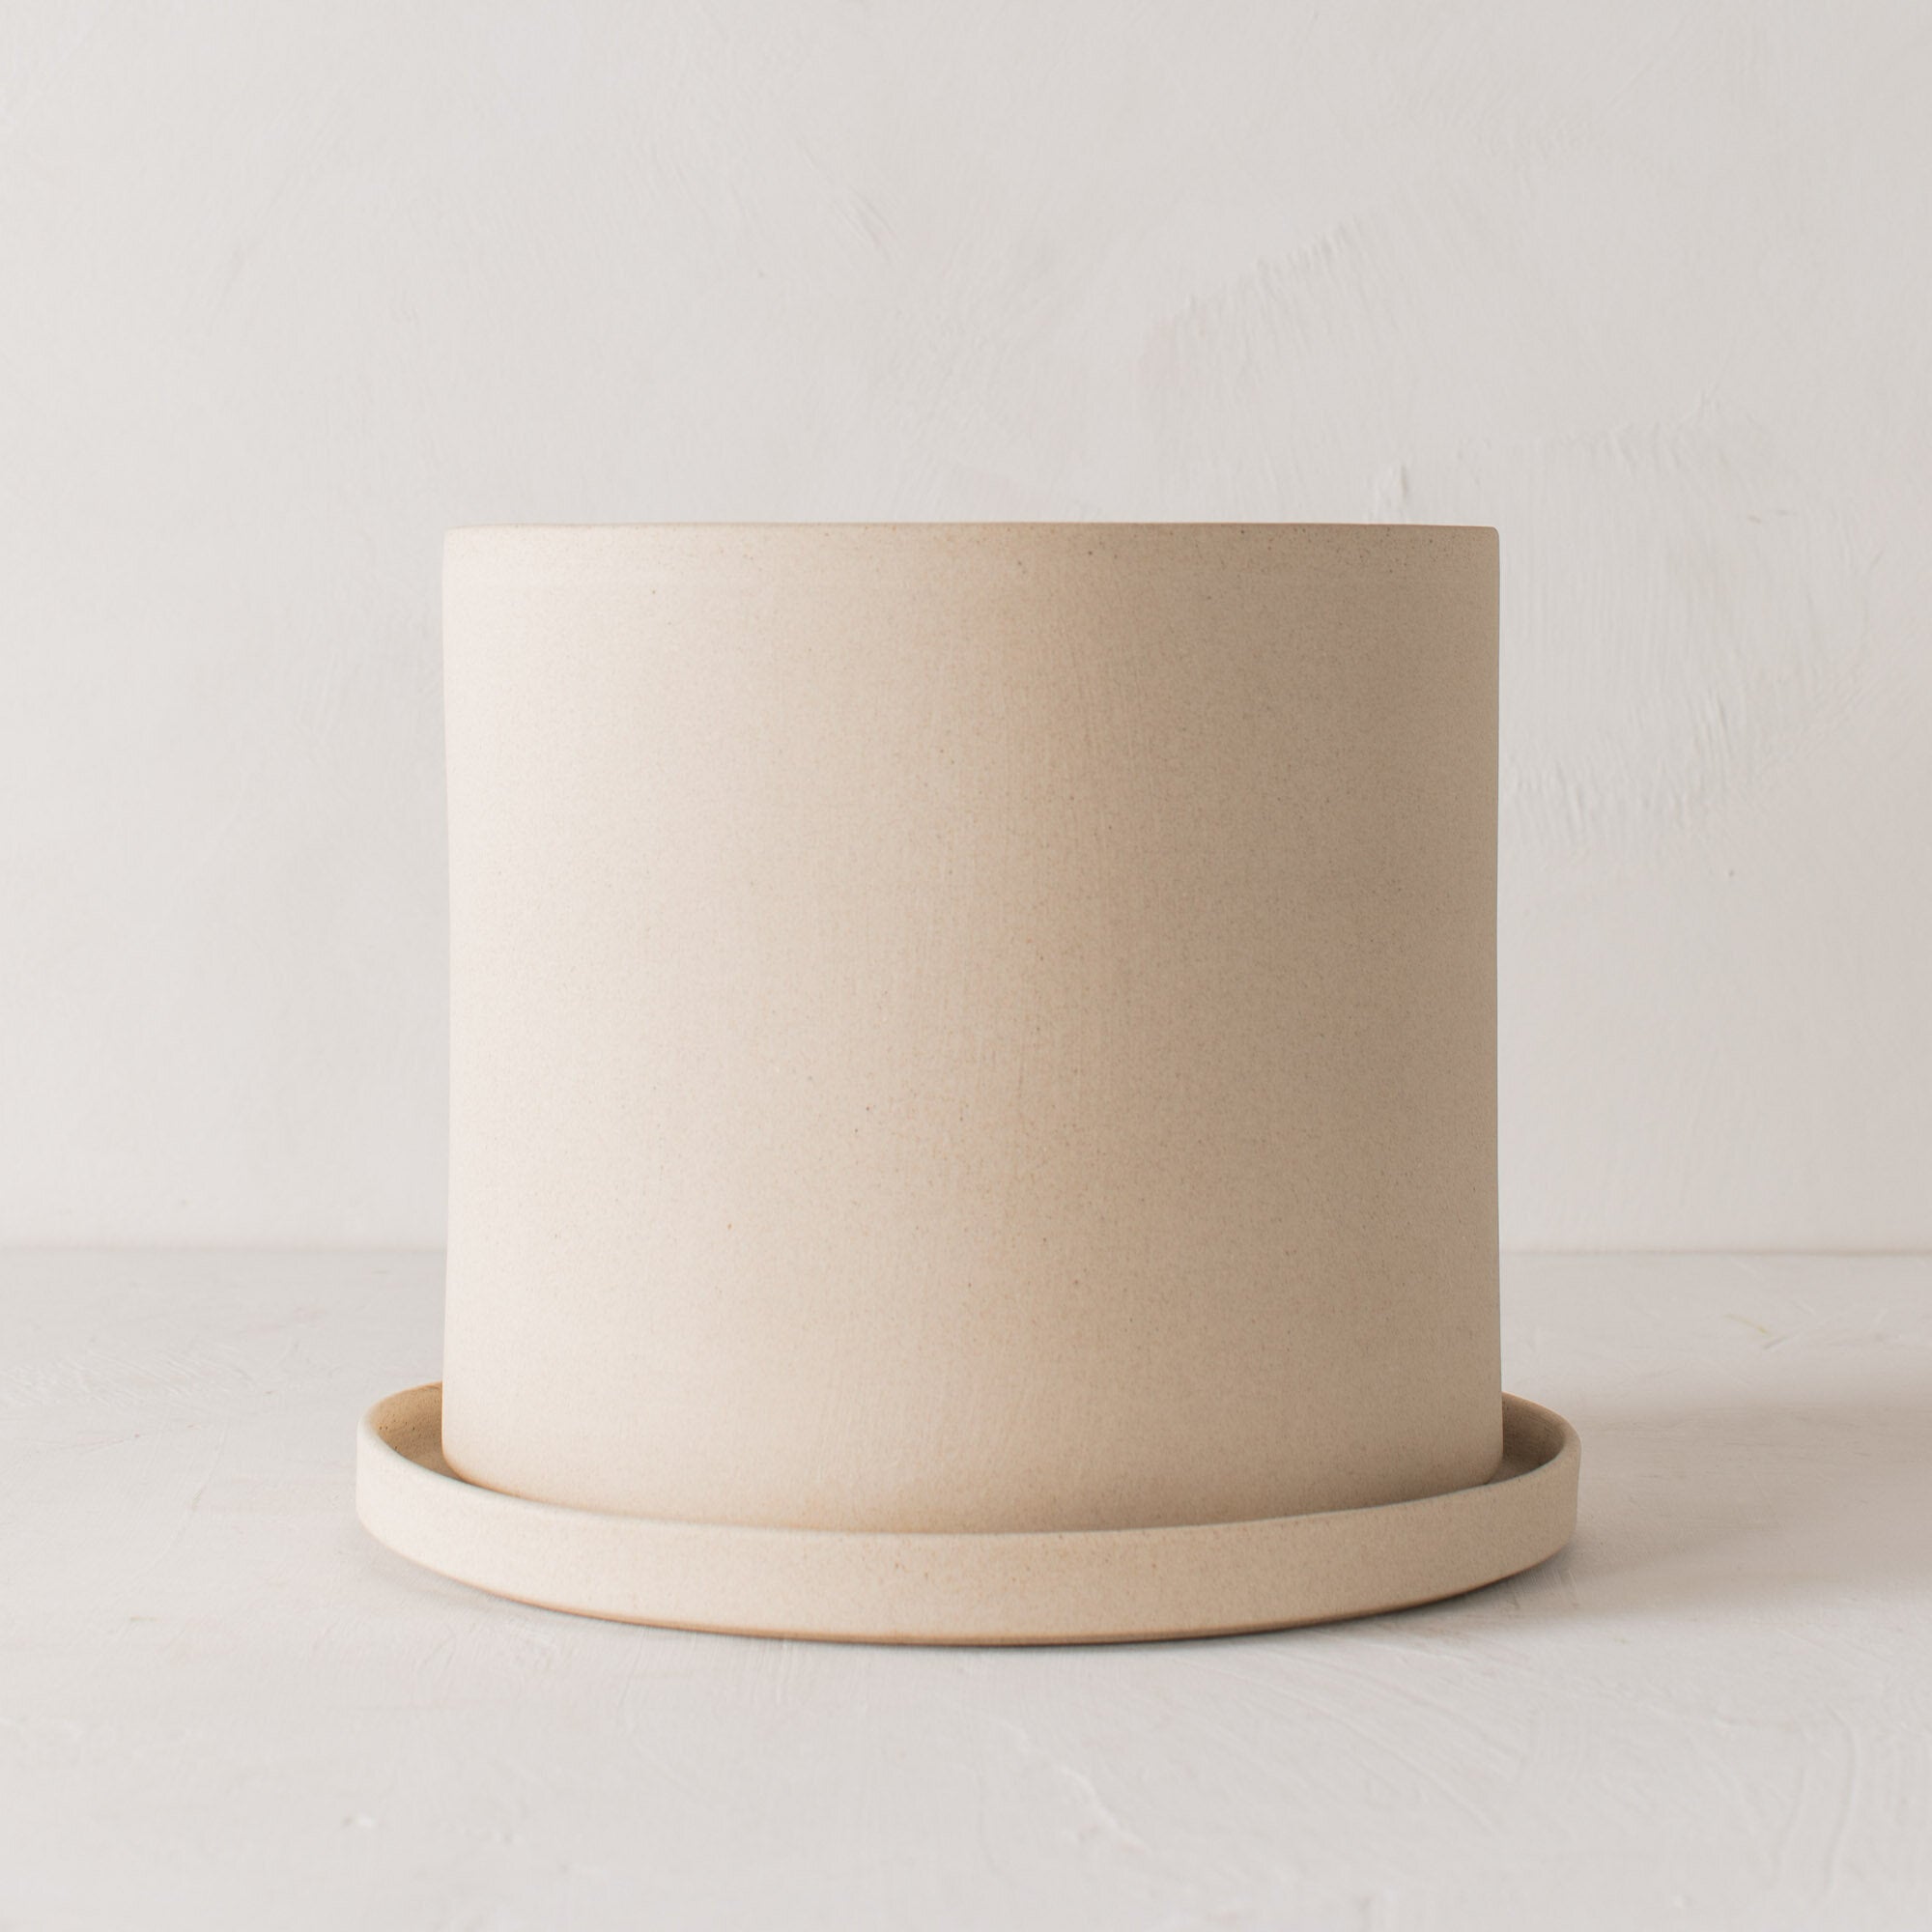 Stoneware 10 inch ceramic planter with bottom drainage dish. Staged on a white plaster textured tabletop against a plaster textured white wall. Designed and sold by Convivial Production, Kansas City Ceramics. 